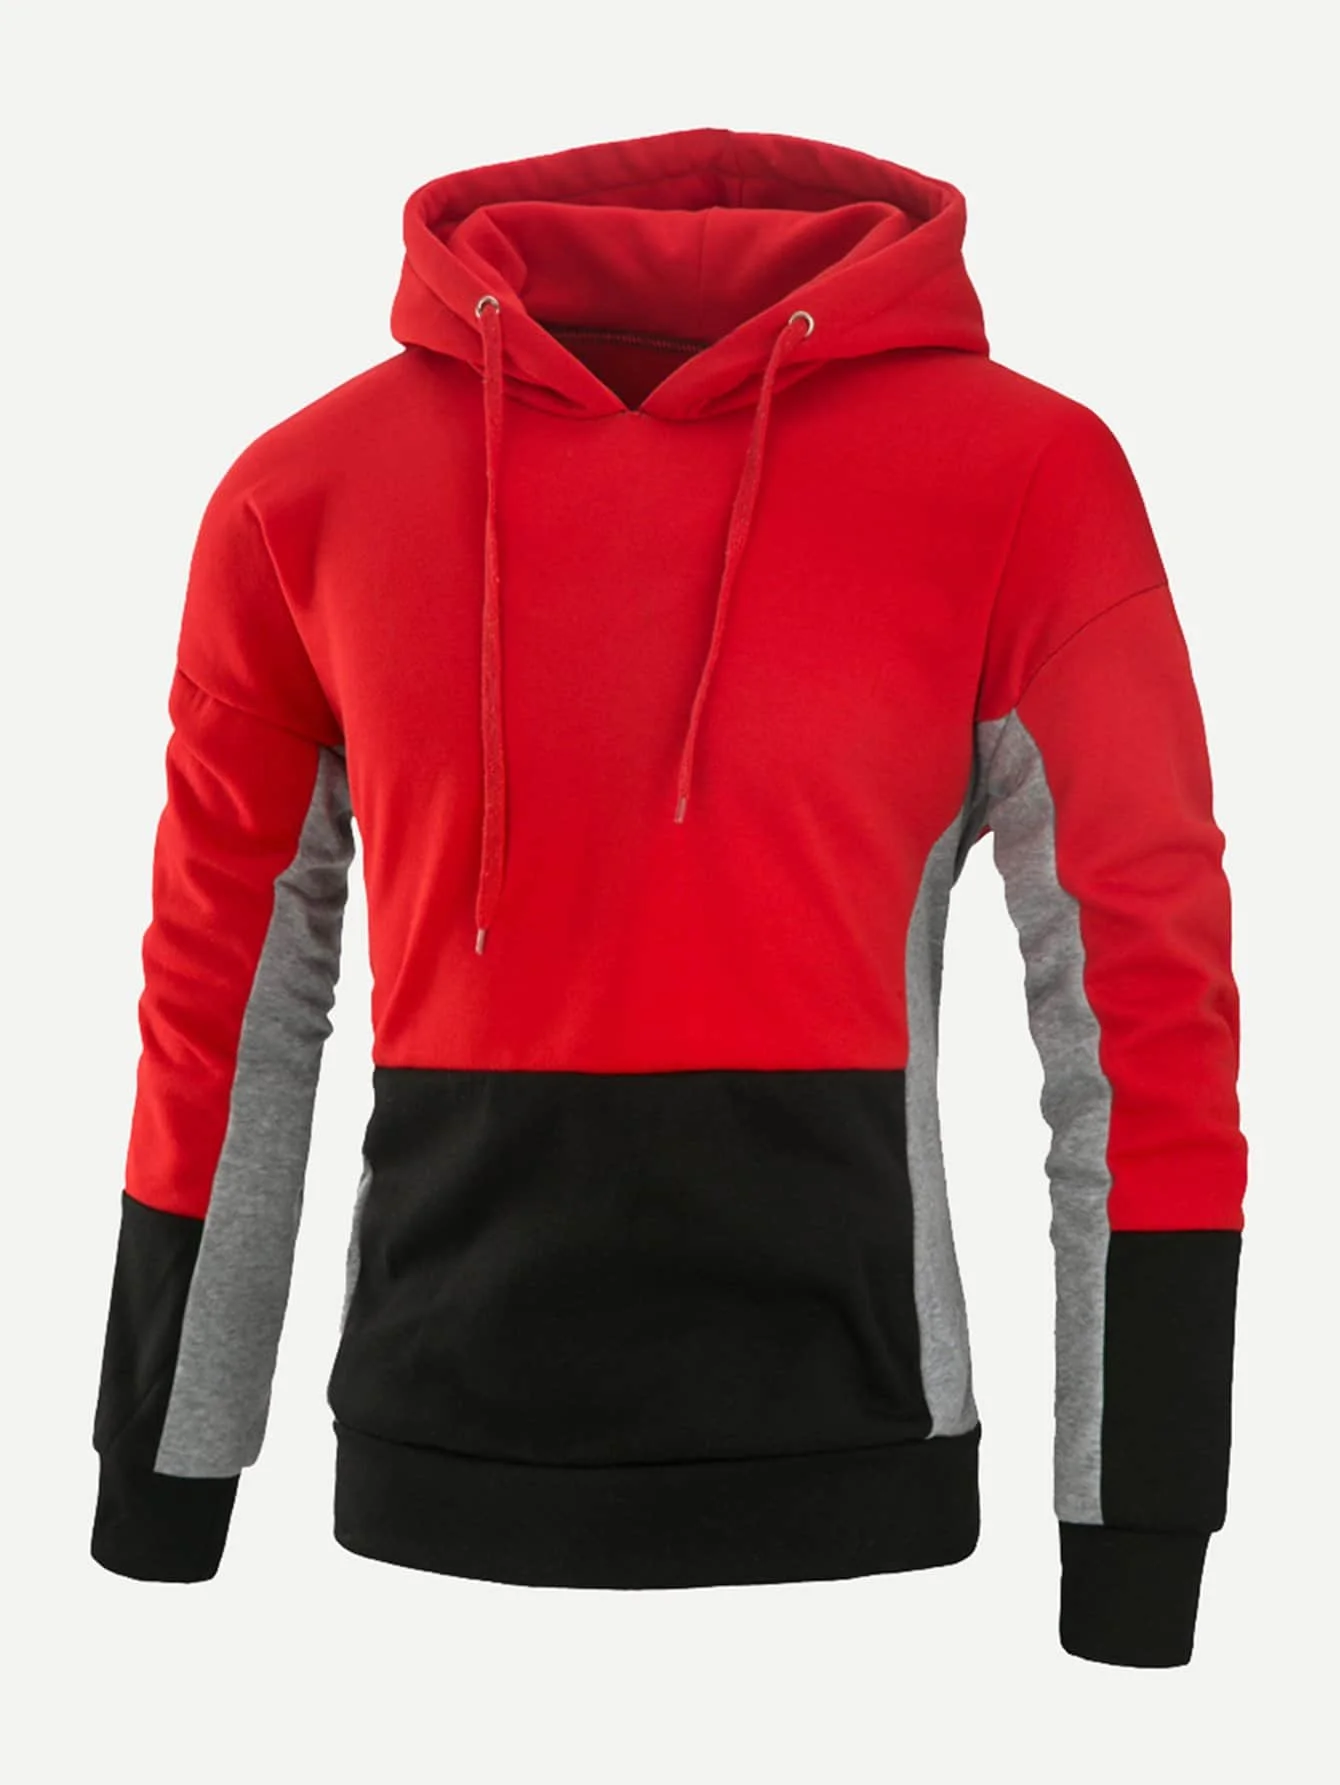 Private Label Hooded Sweatshirts - Trusted Manufacturer in Bangladesh